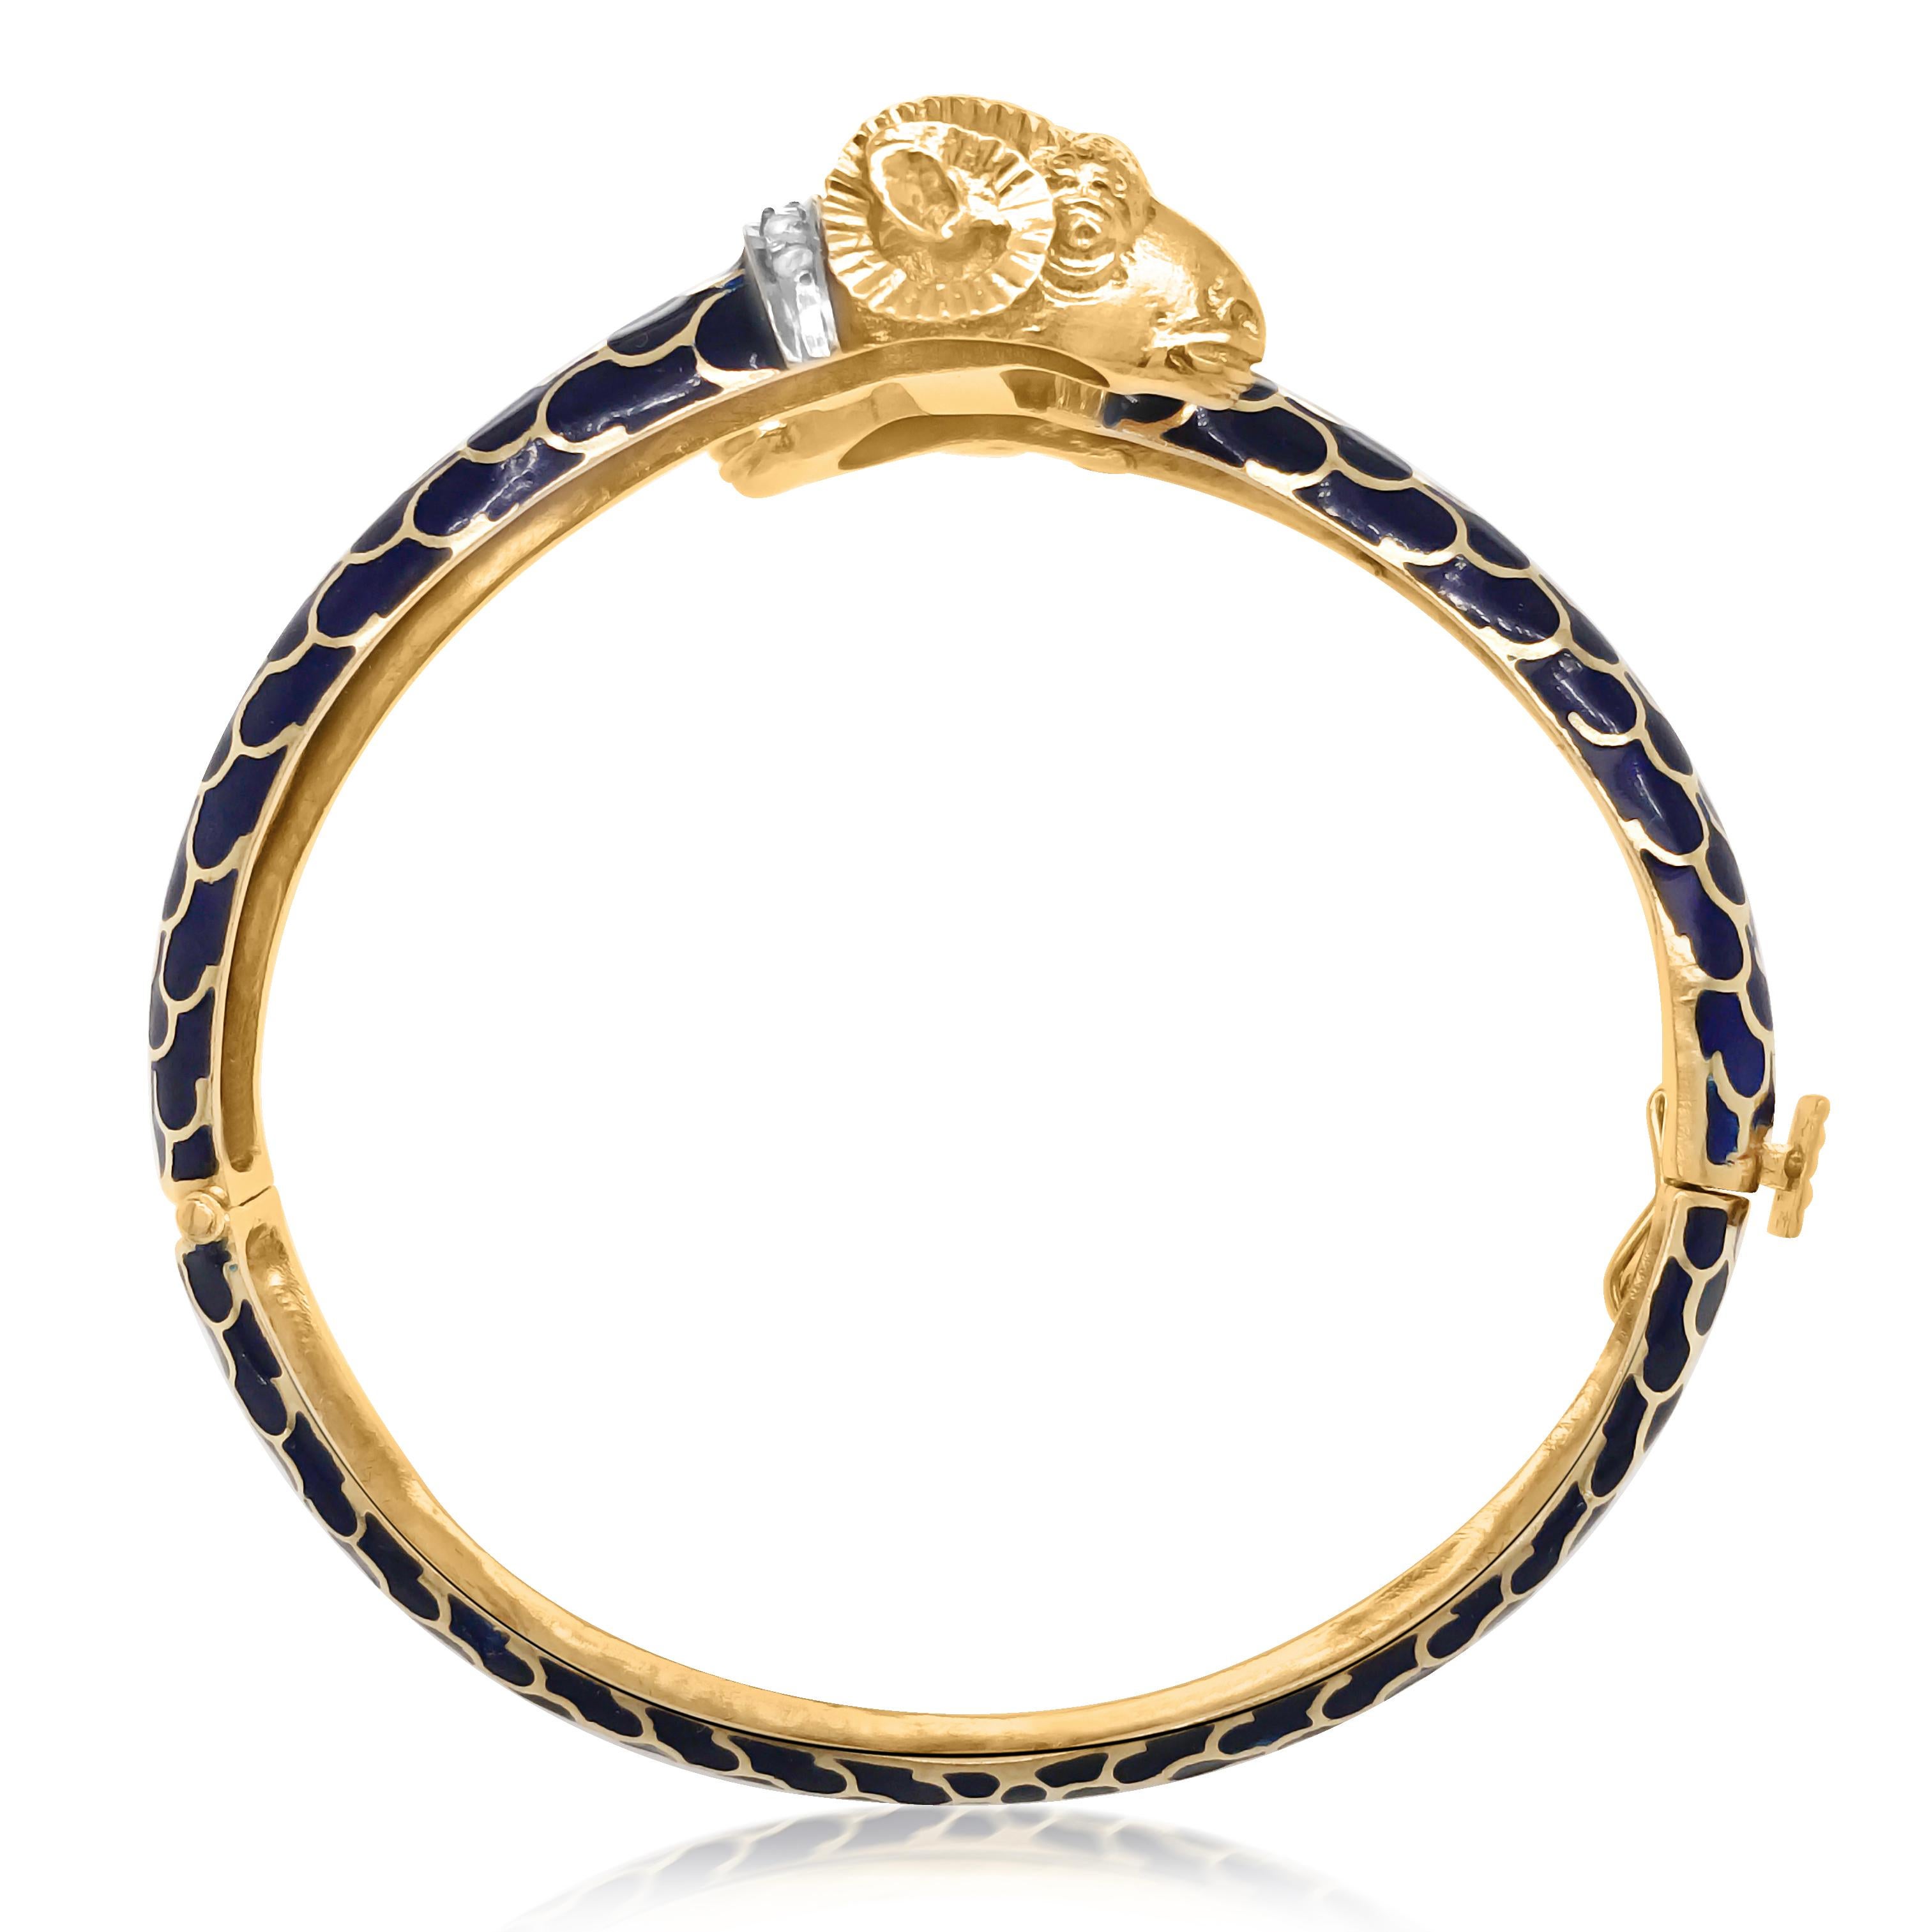 This stunning vintage blue enamel 18K yellow gold bangle has fabulous textured and lively crafted double lamb's heads, with 5 diamonds on each neck. This bangle is covered with the golden python pattern and filled with beautiful blue enamel,